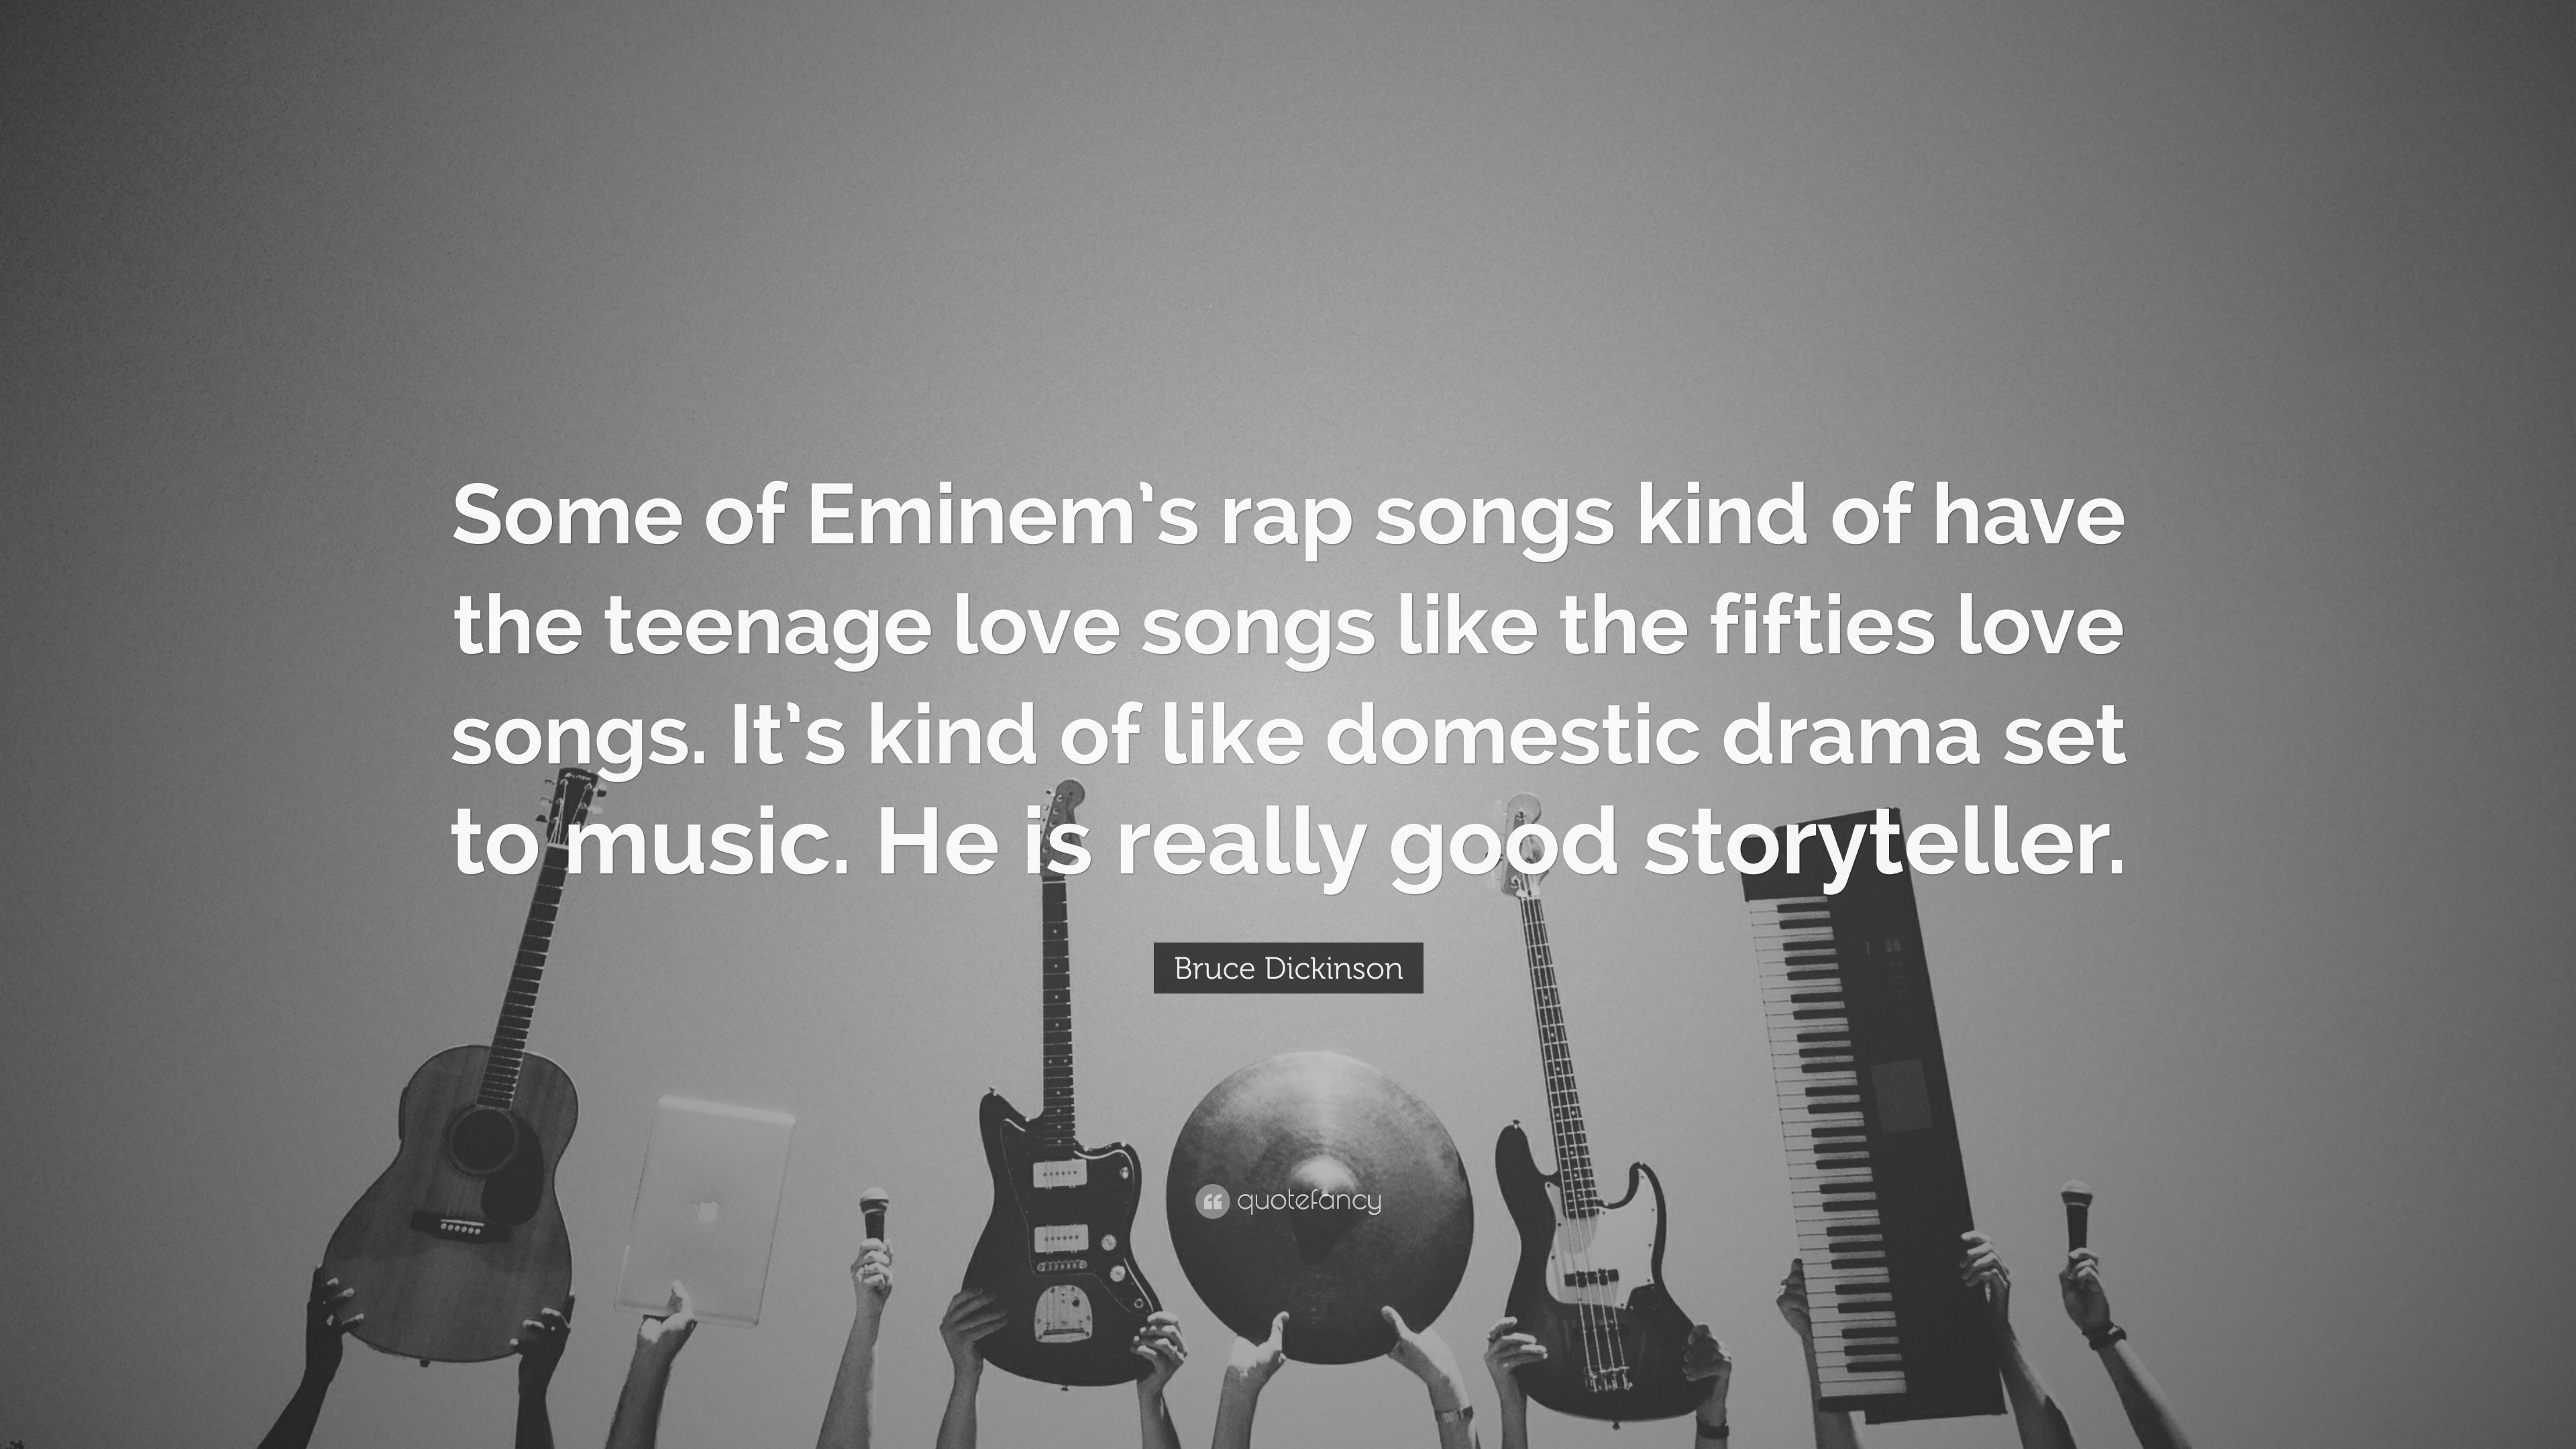 Bruce Dickinson Quote “Some of Eminem s rap songs kind of have the teenage love